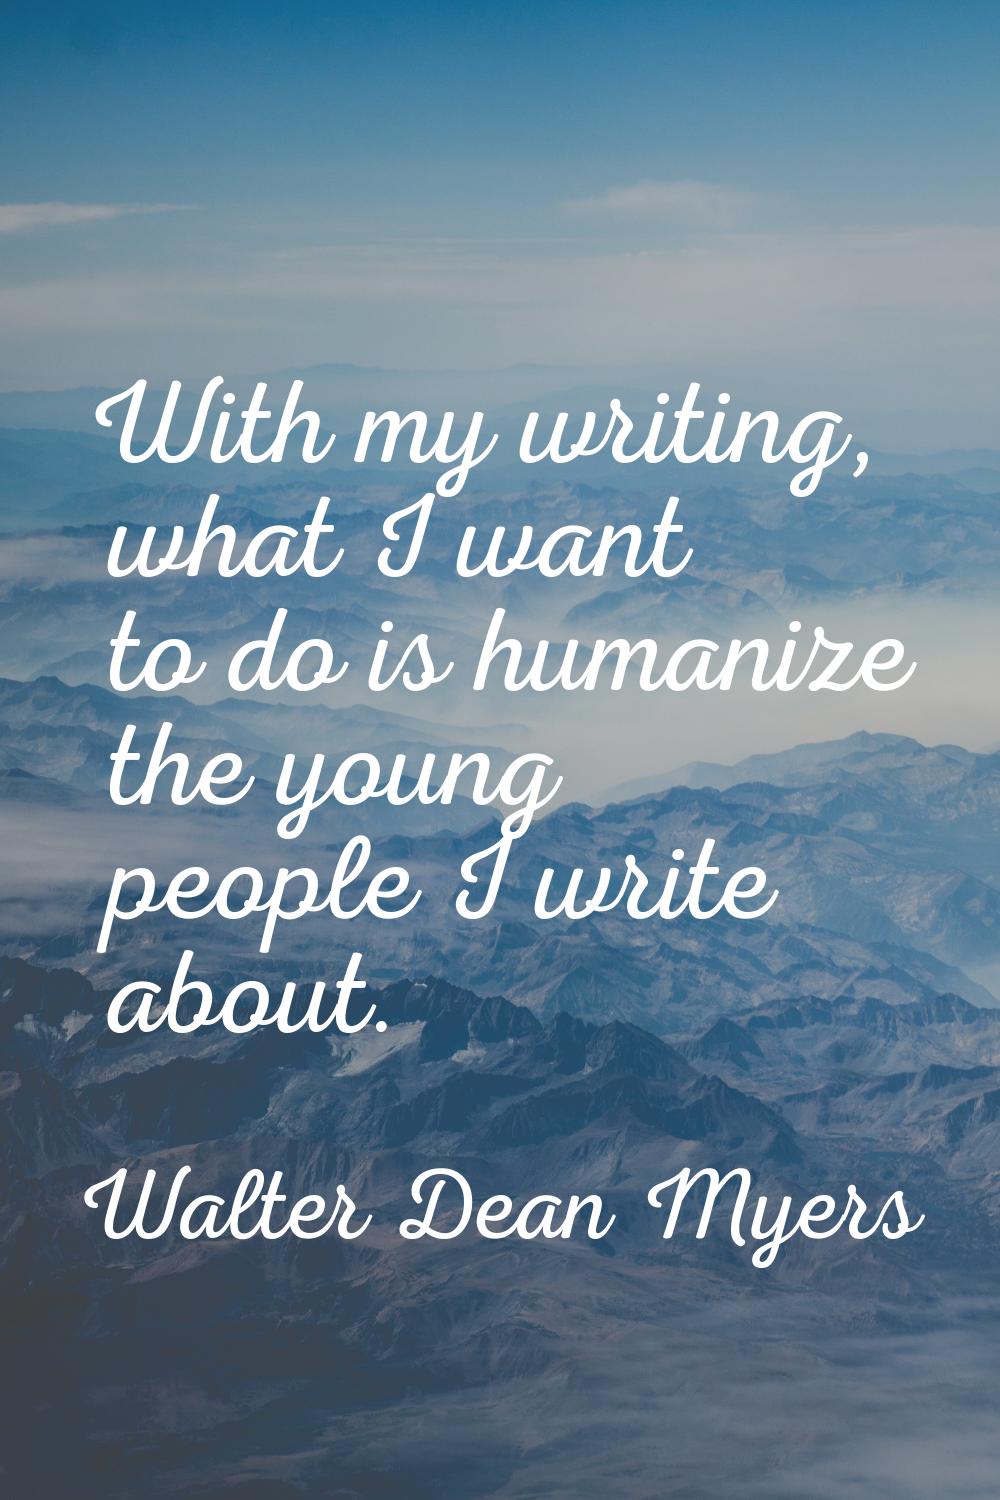 With my writing, what I want to do is humanize the young people I write about.